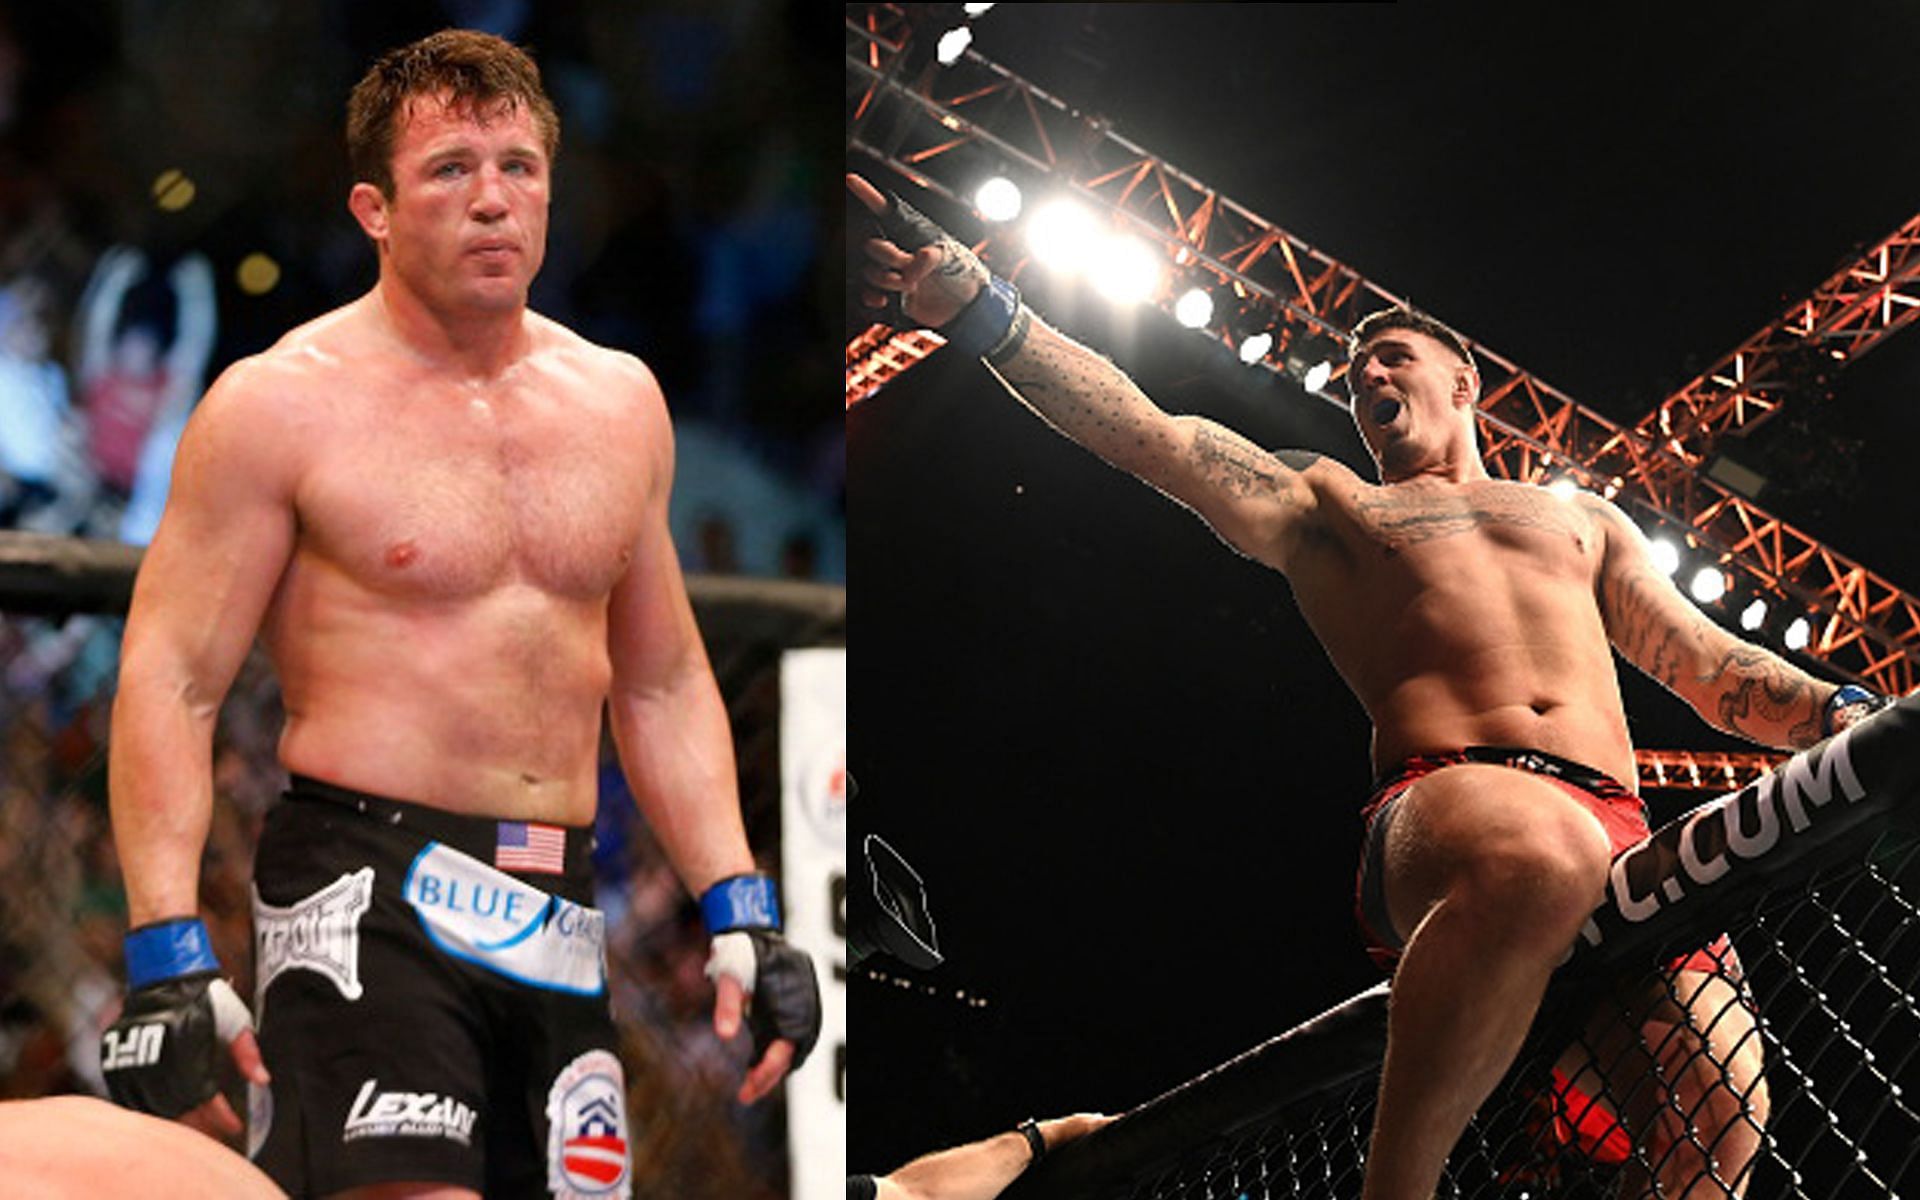 Chael Sonnen (left) and Tom Aspinall (right)